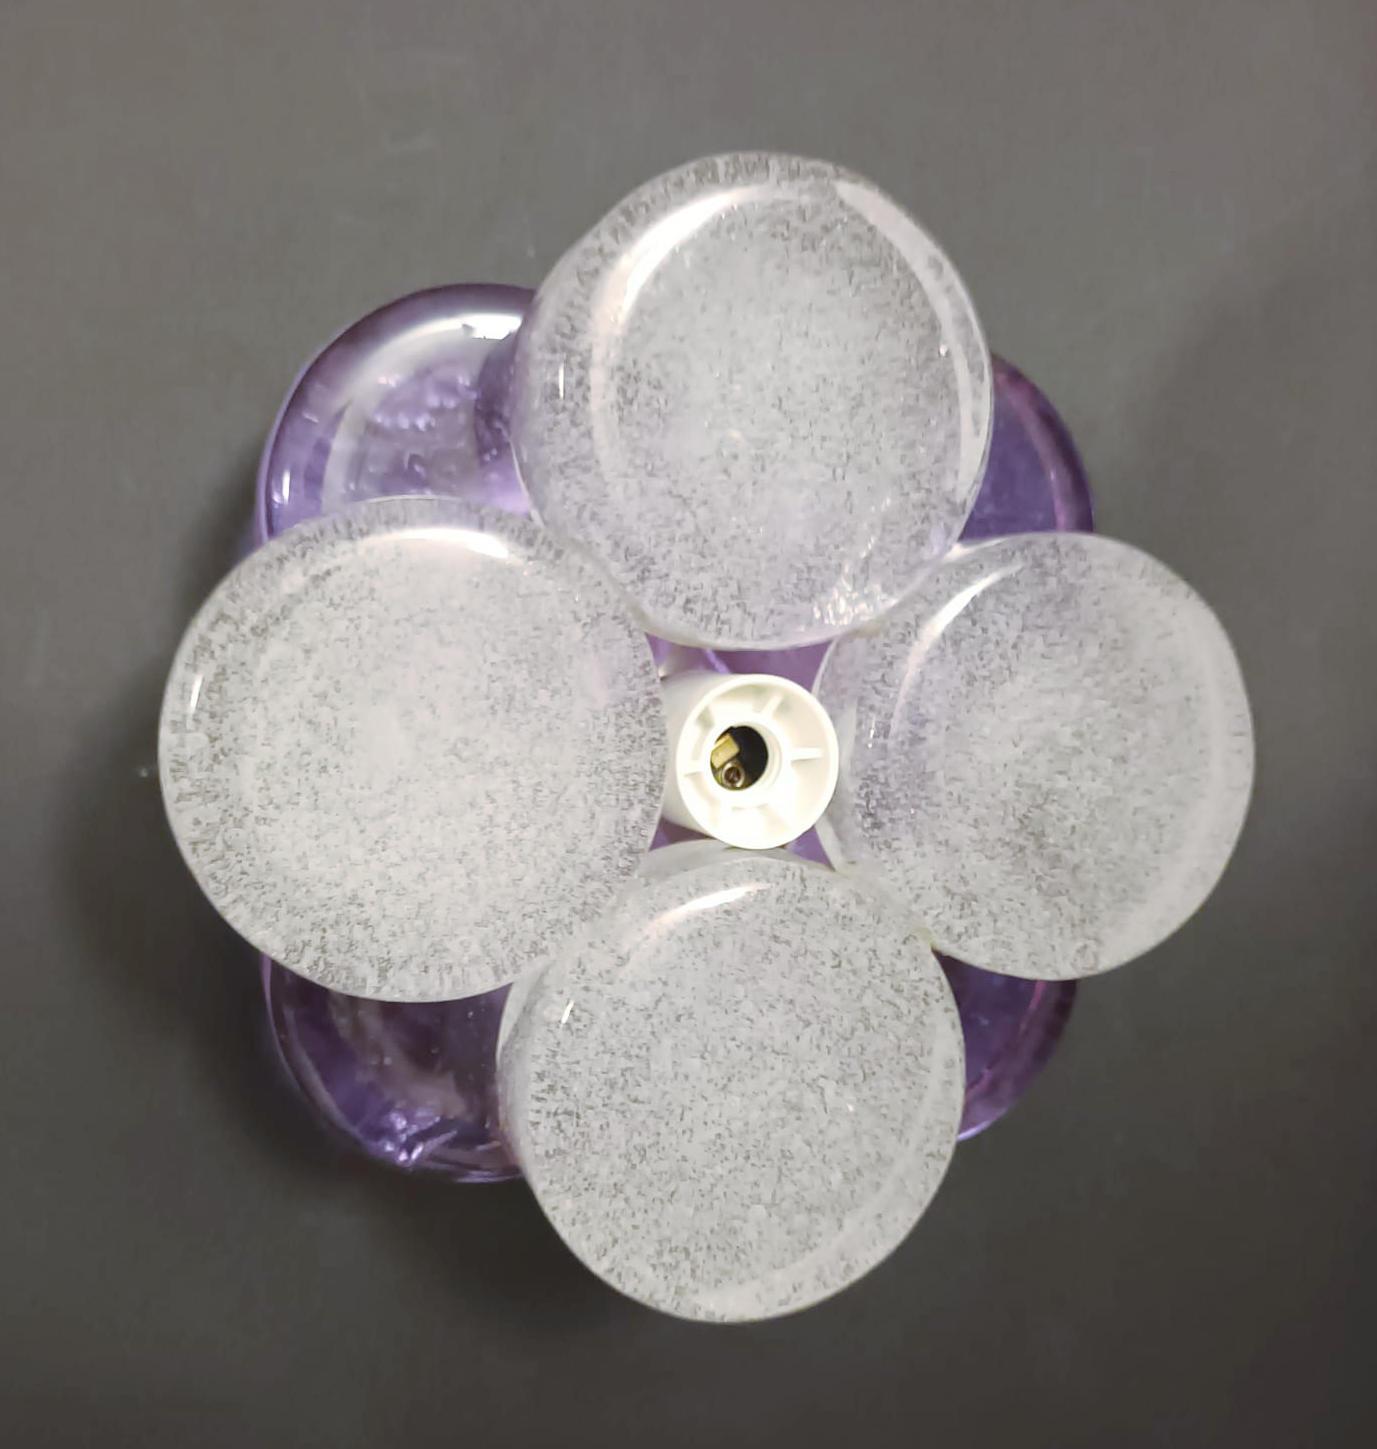 Vintage Italian wall lights or flush mounts with hand blown amethyst and clear bubbles Murano glasses petals mounted on nickel frames / made in Italy by Albano Poli for Poliarte, circa 1970s
Measures: diameter 7 inches, height 3 inches.
1 Light /